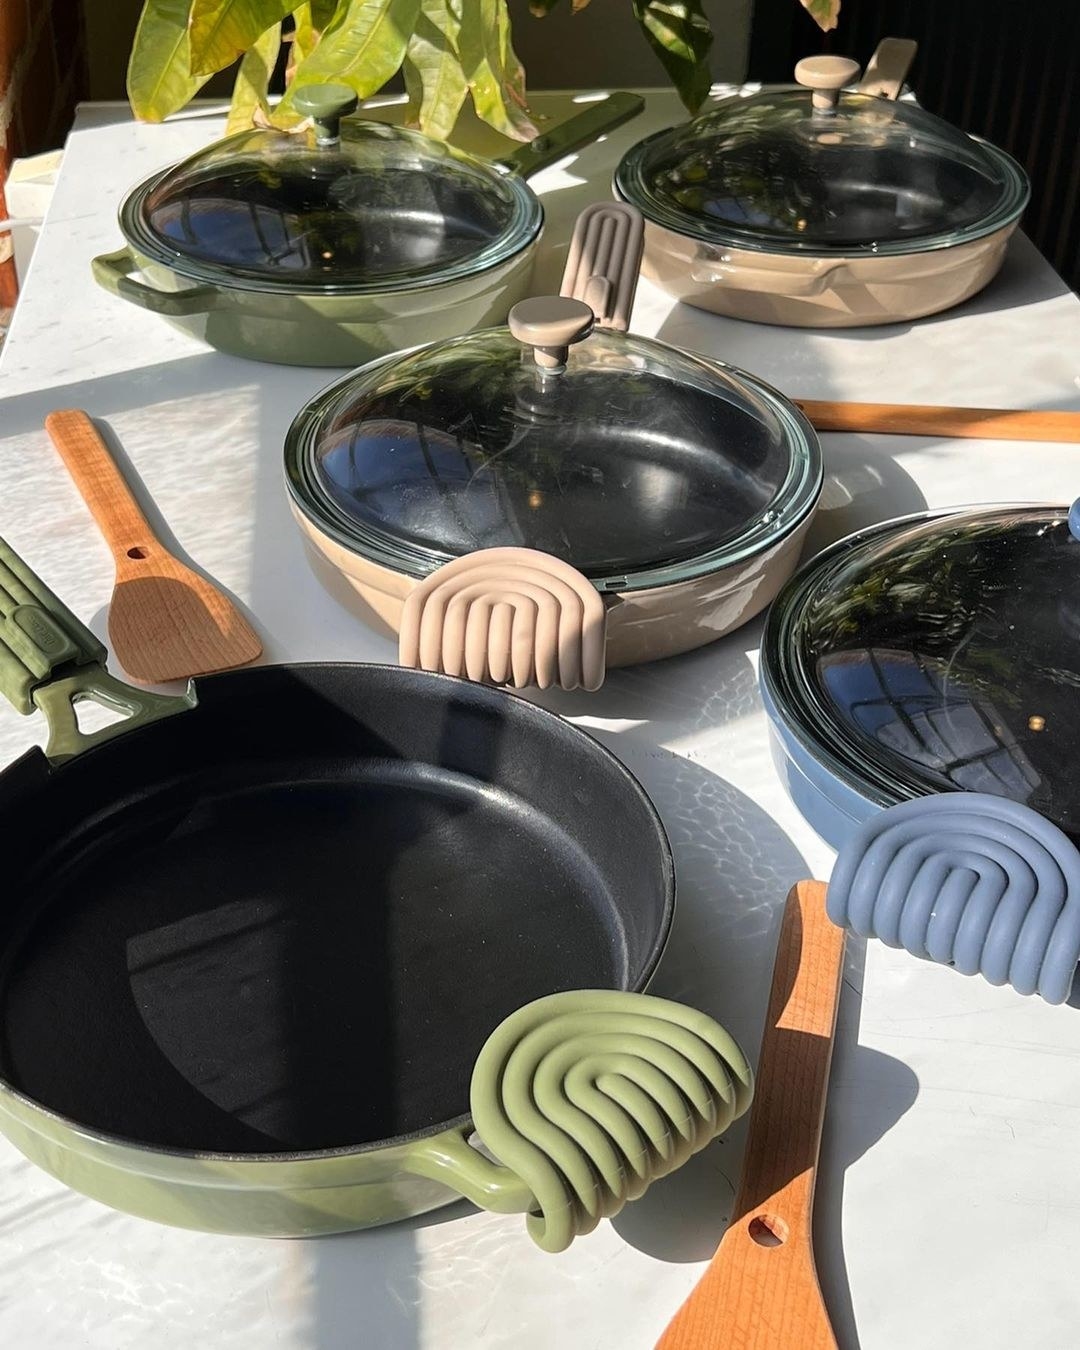 Several cast iron pans on a table